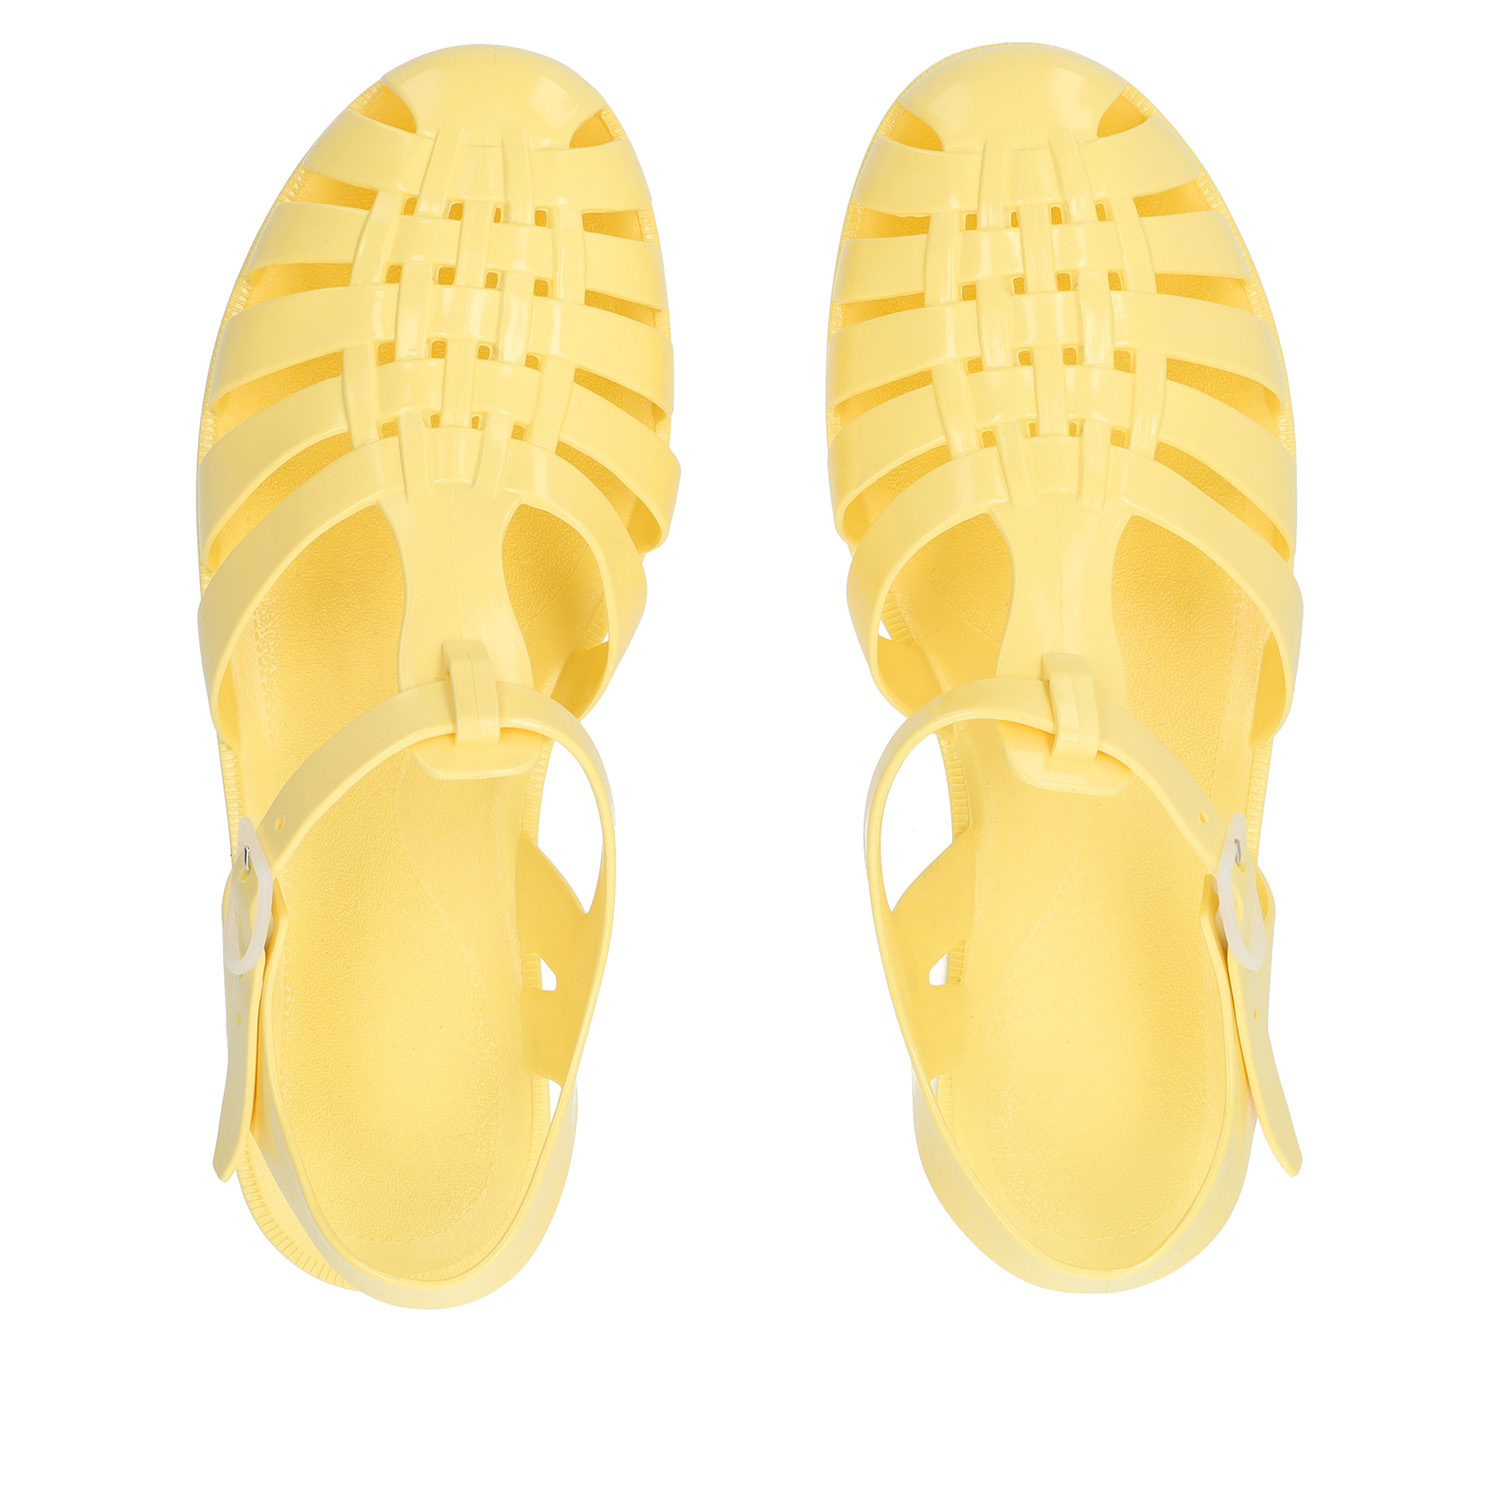 Yellow Water Sandals 